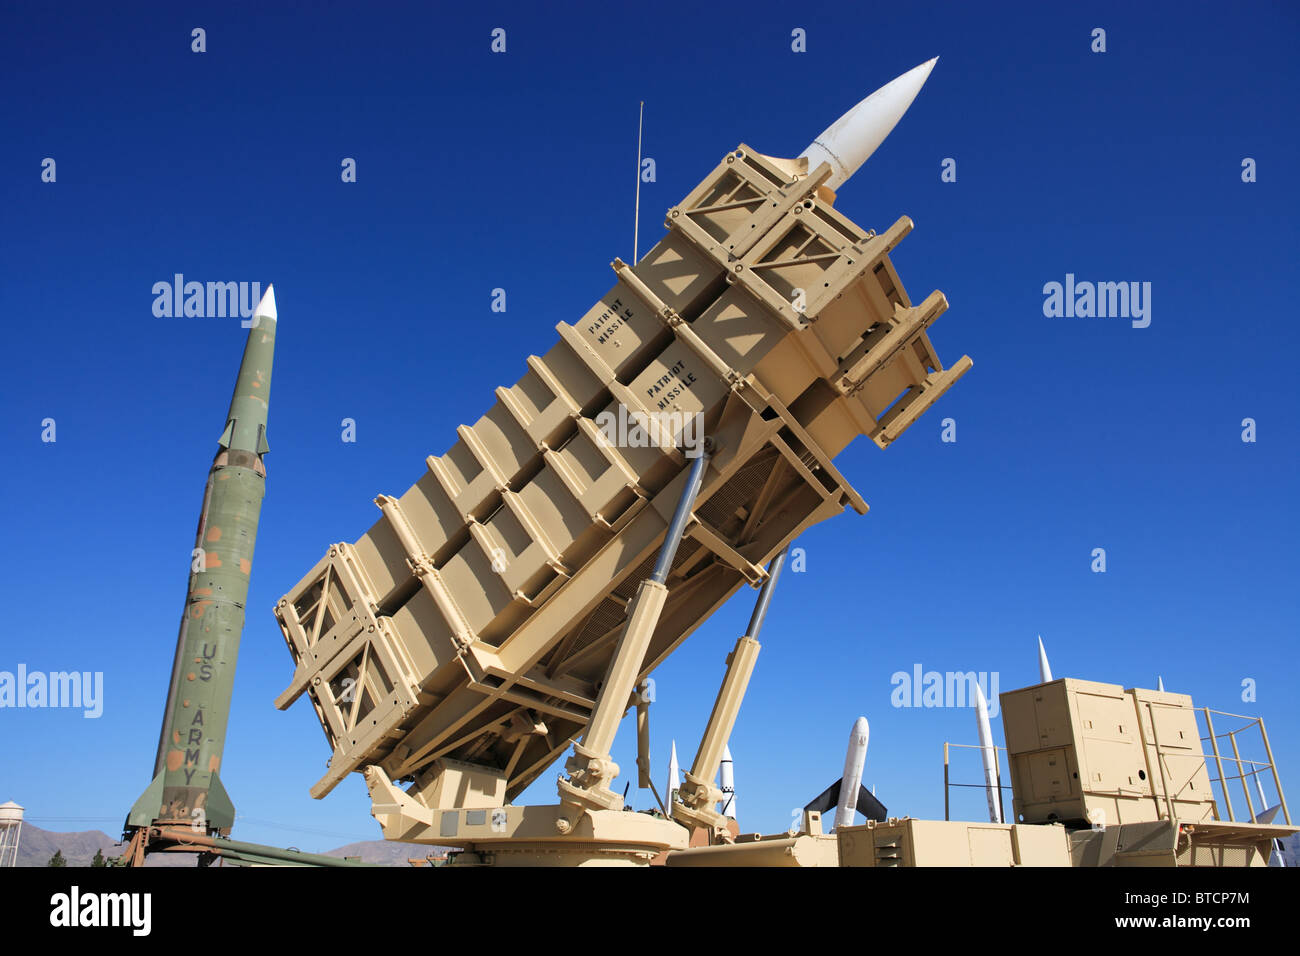 Patriot missile battery on display at the White Sands Missile Range Museum, New Mexico. Stock Photo